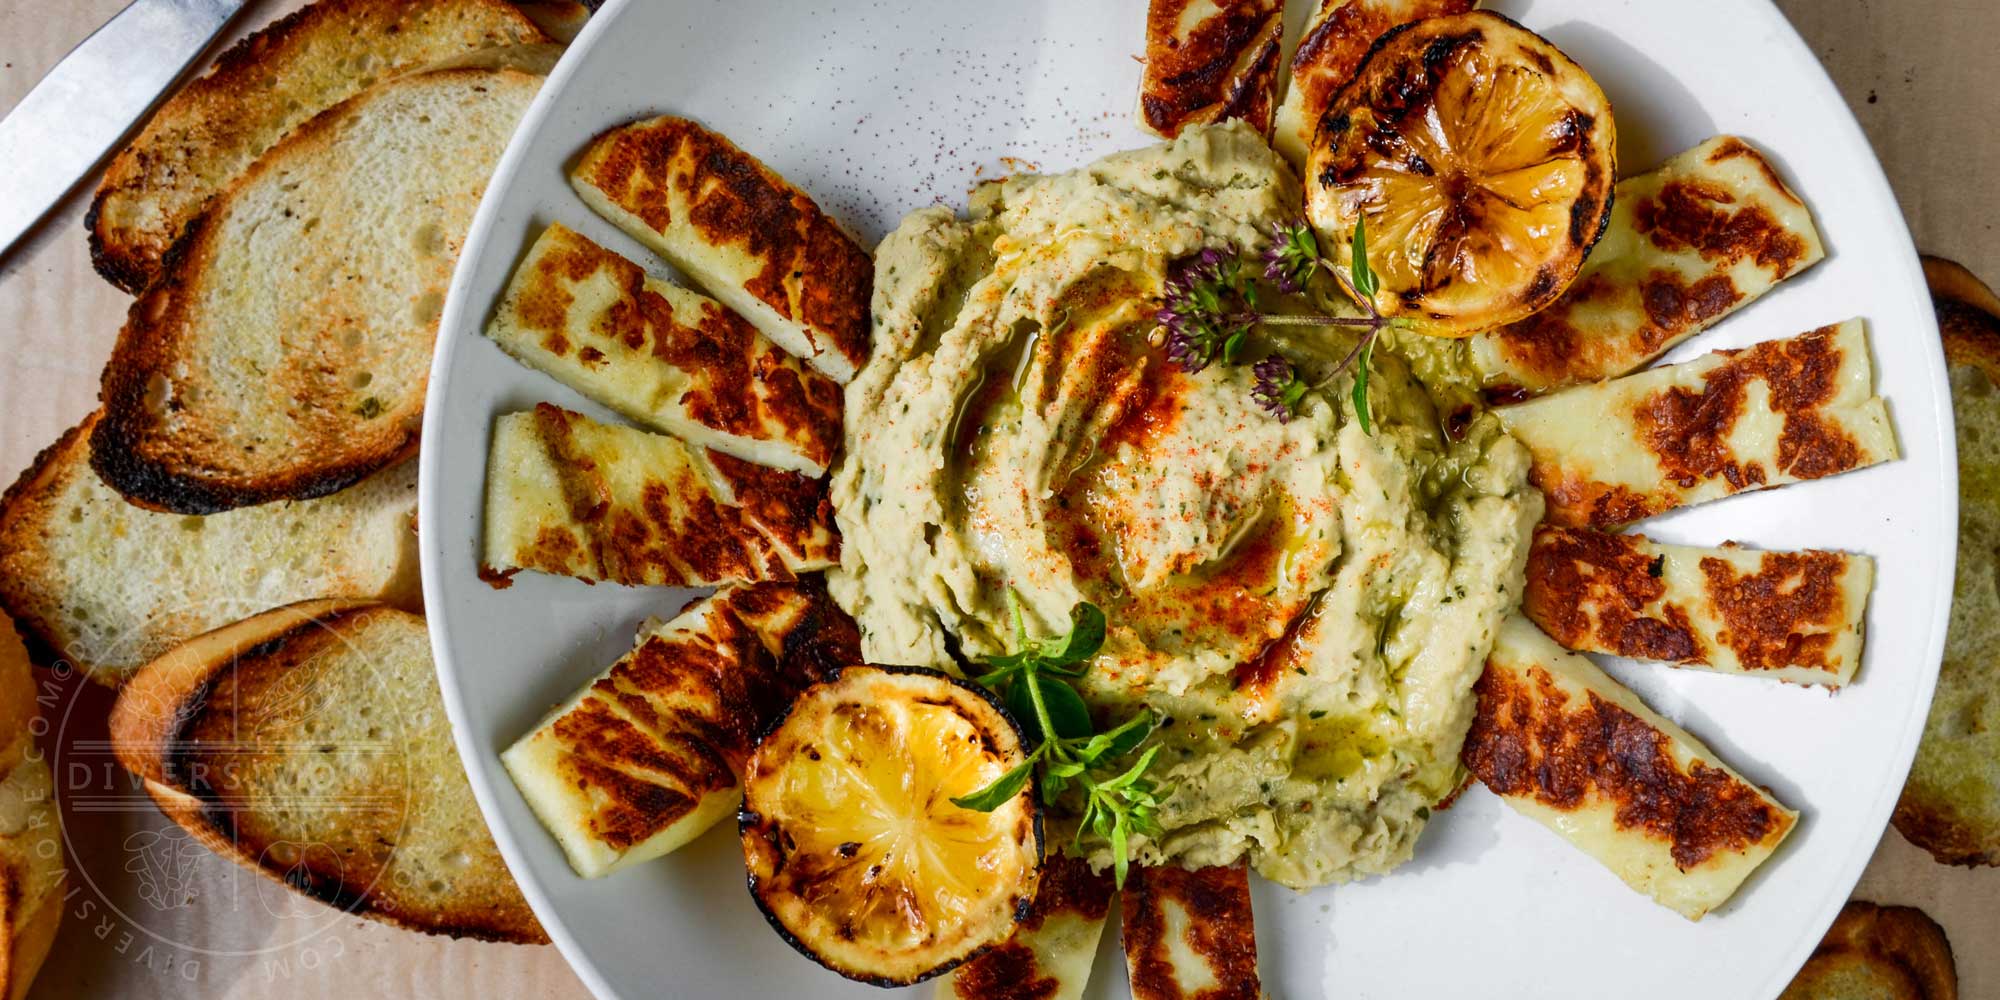 Featured image for “Grilled Halloumi with Basil Cannellini Hummus”